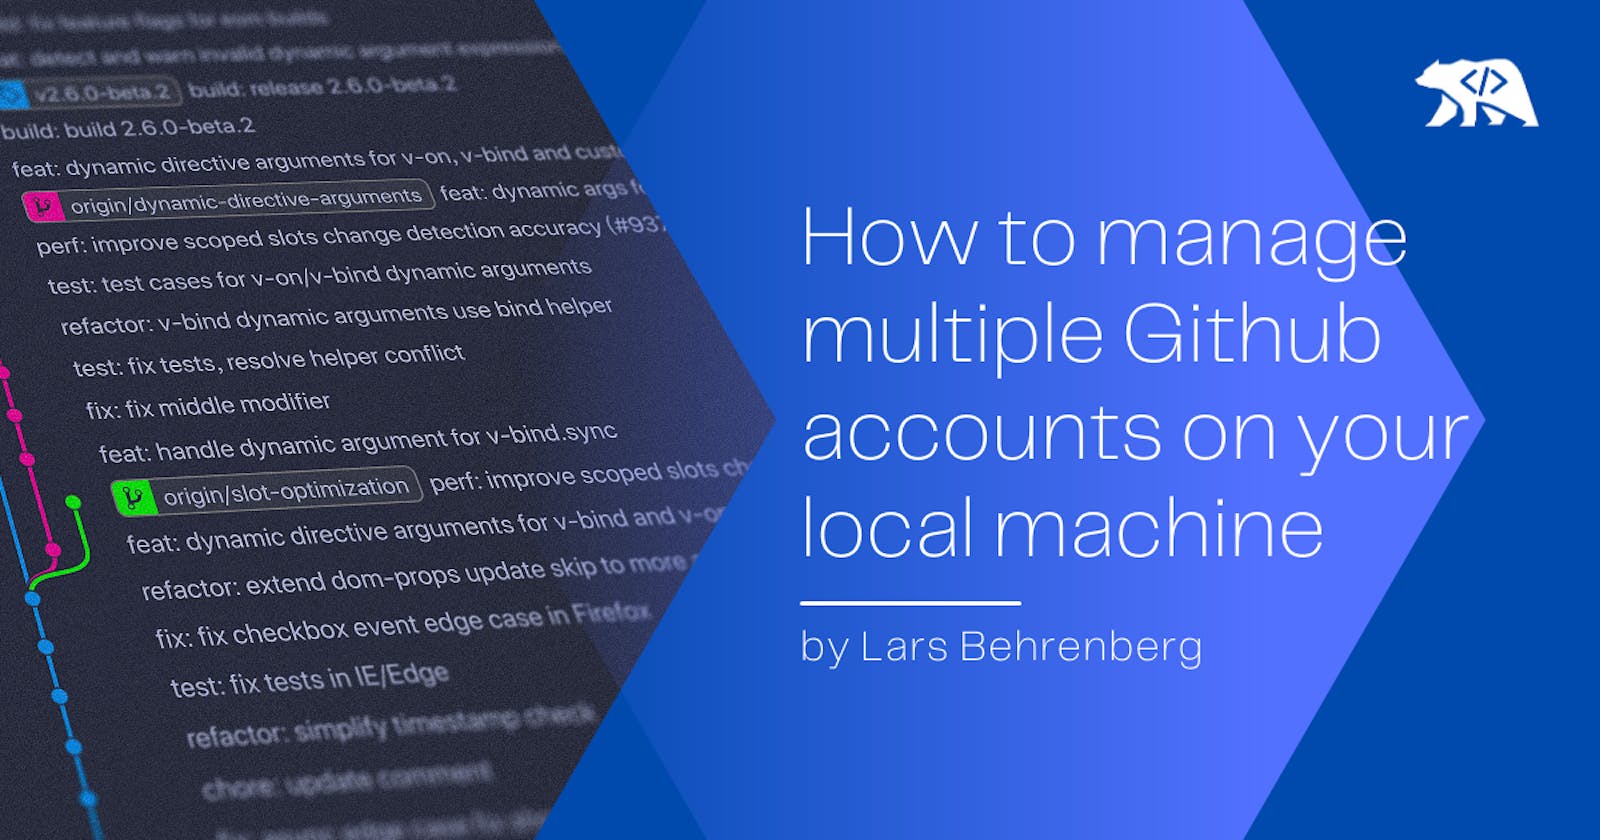 How to manage multiple GitHub accounts on your local machine